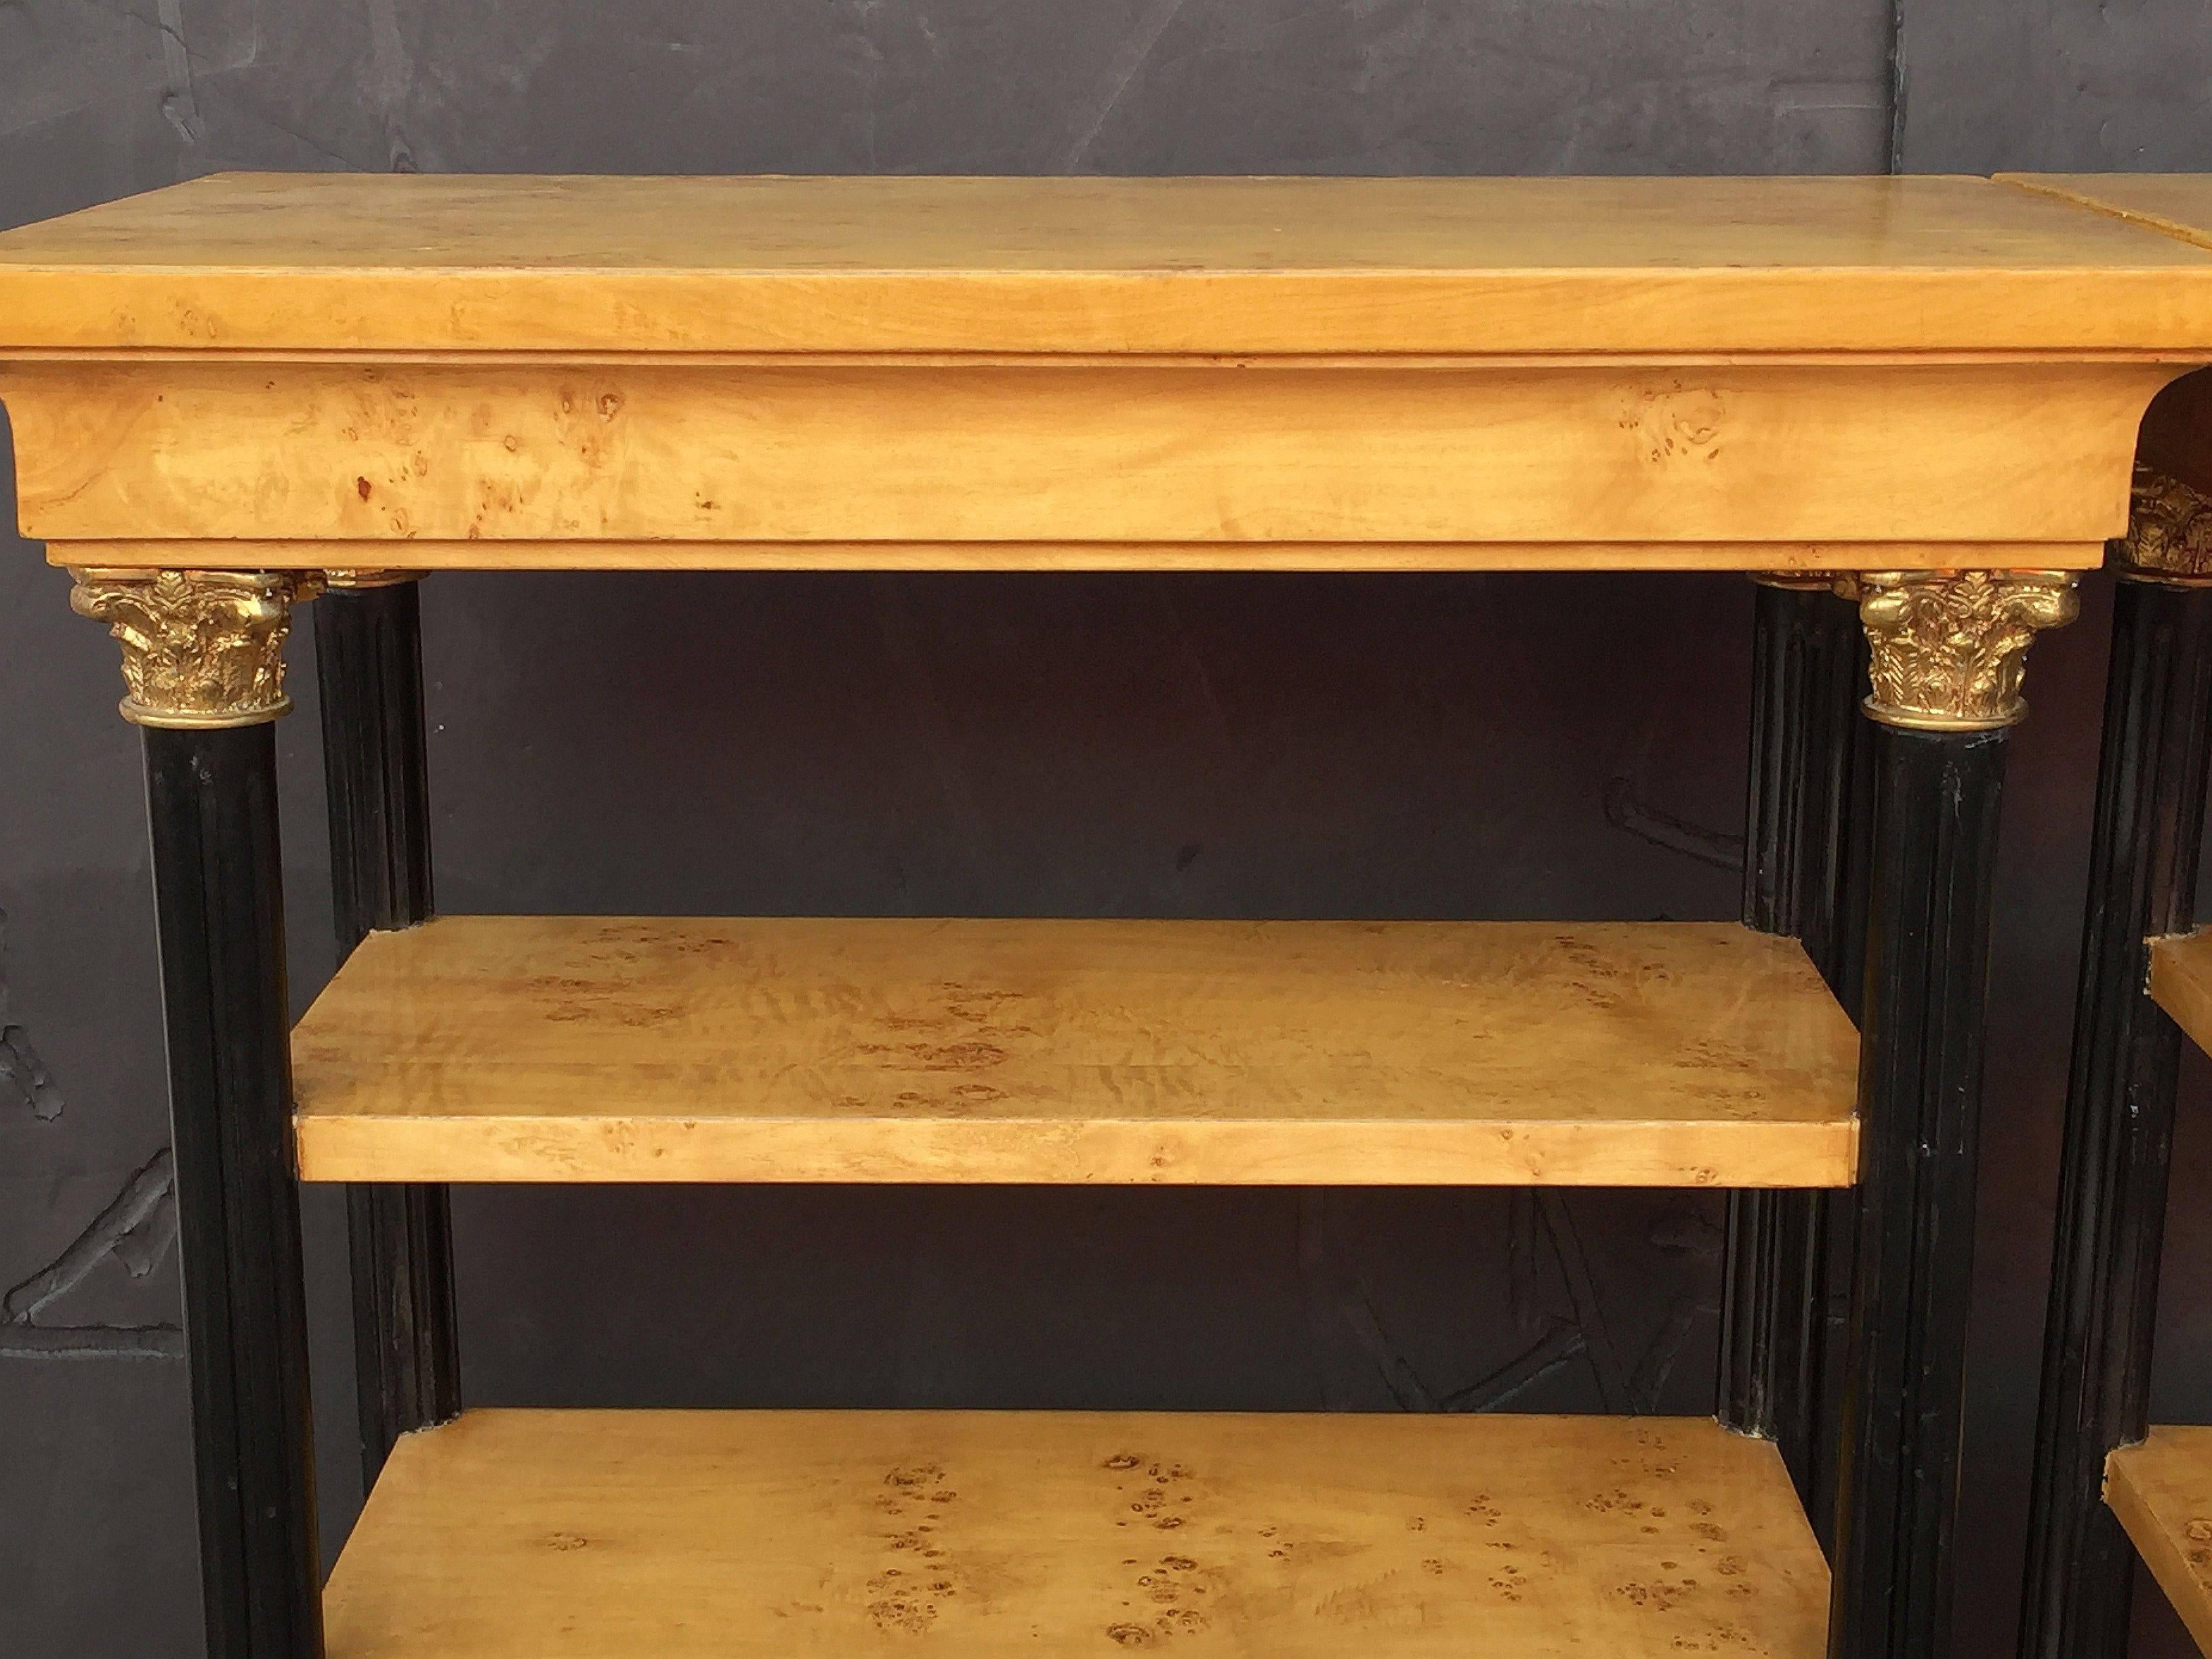 Metal Biedermeier Style Open Bookcases or Shelves from England 'Individually Priced'